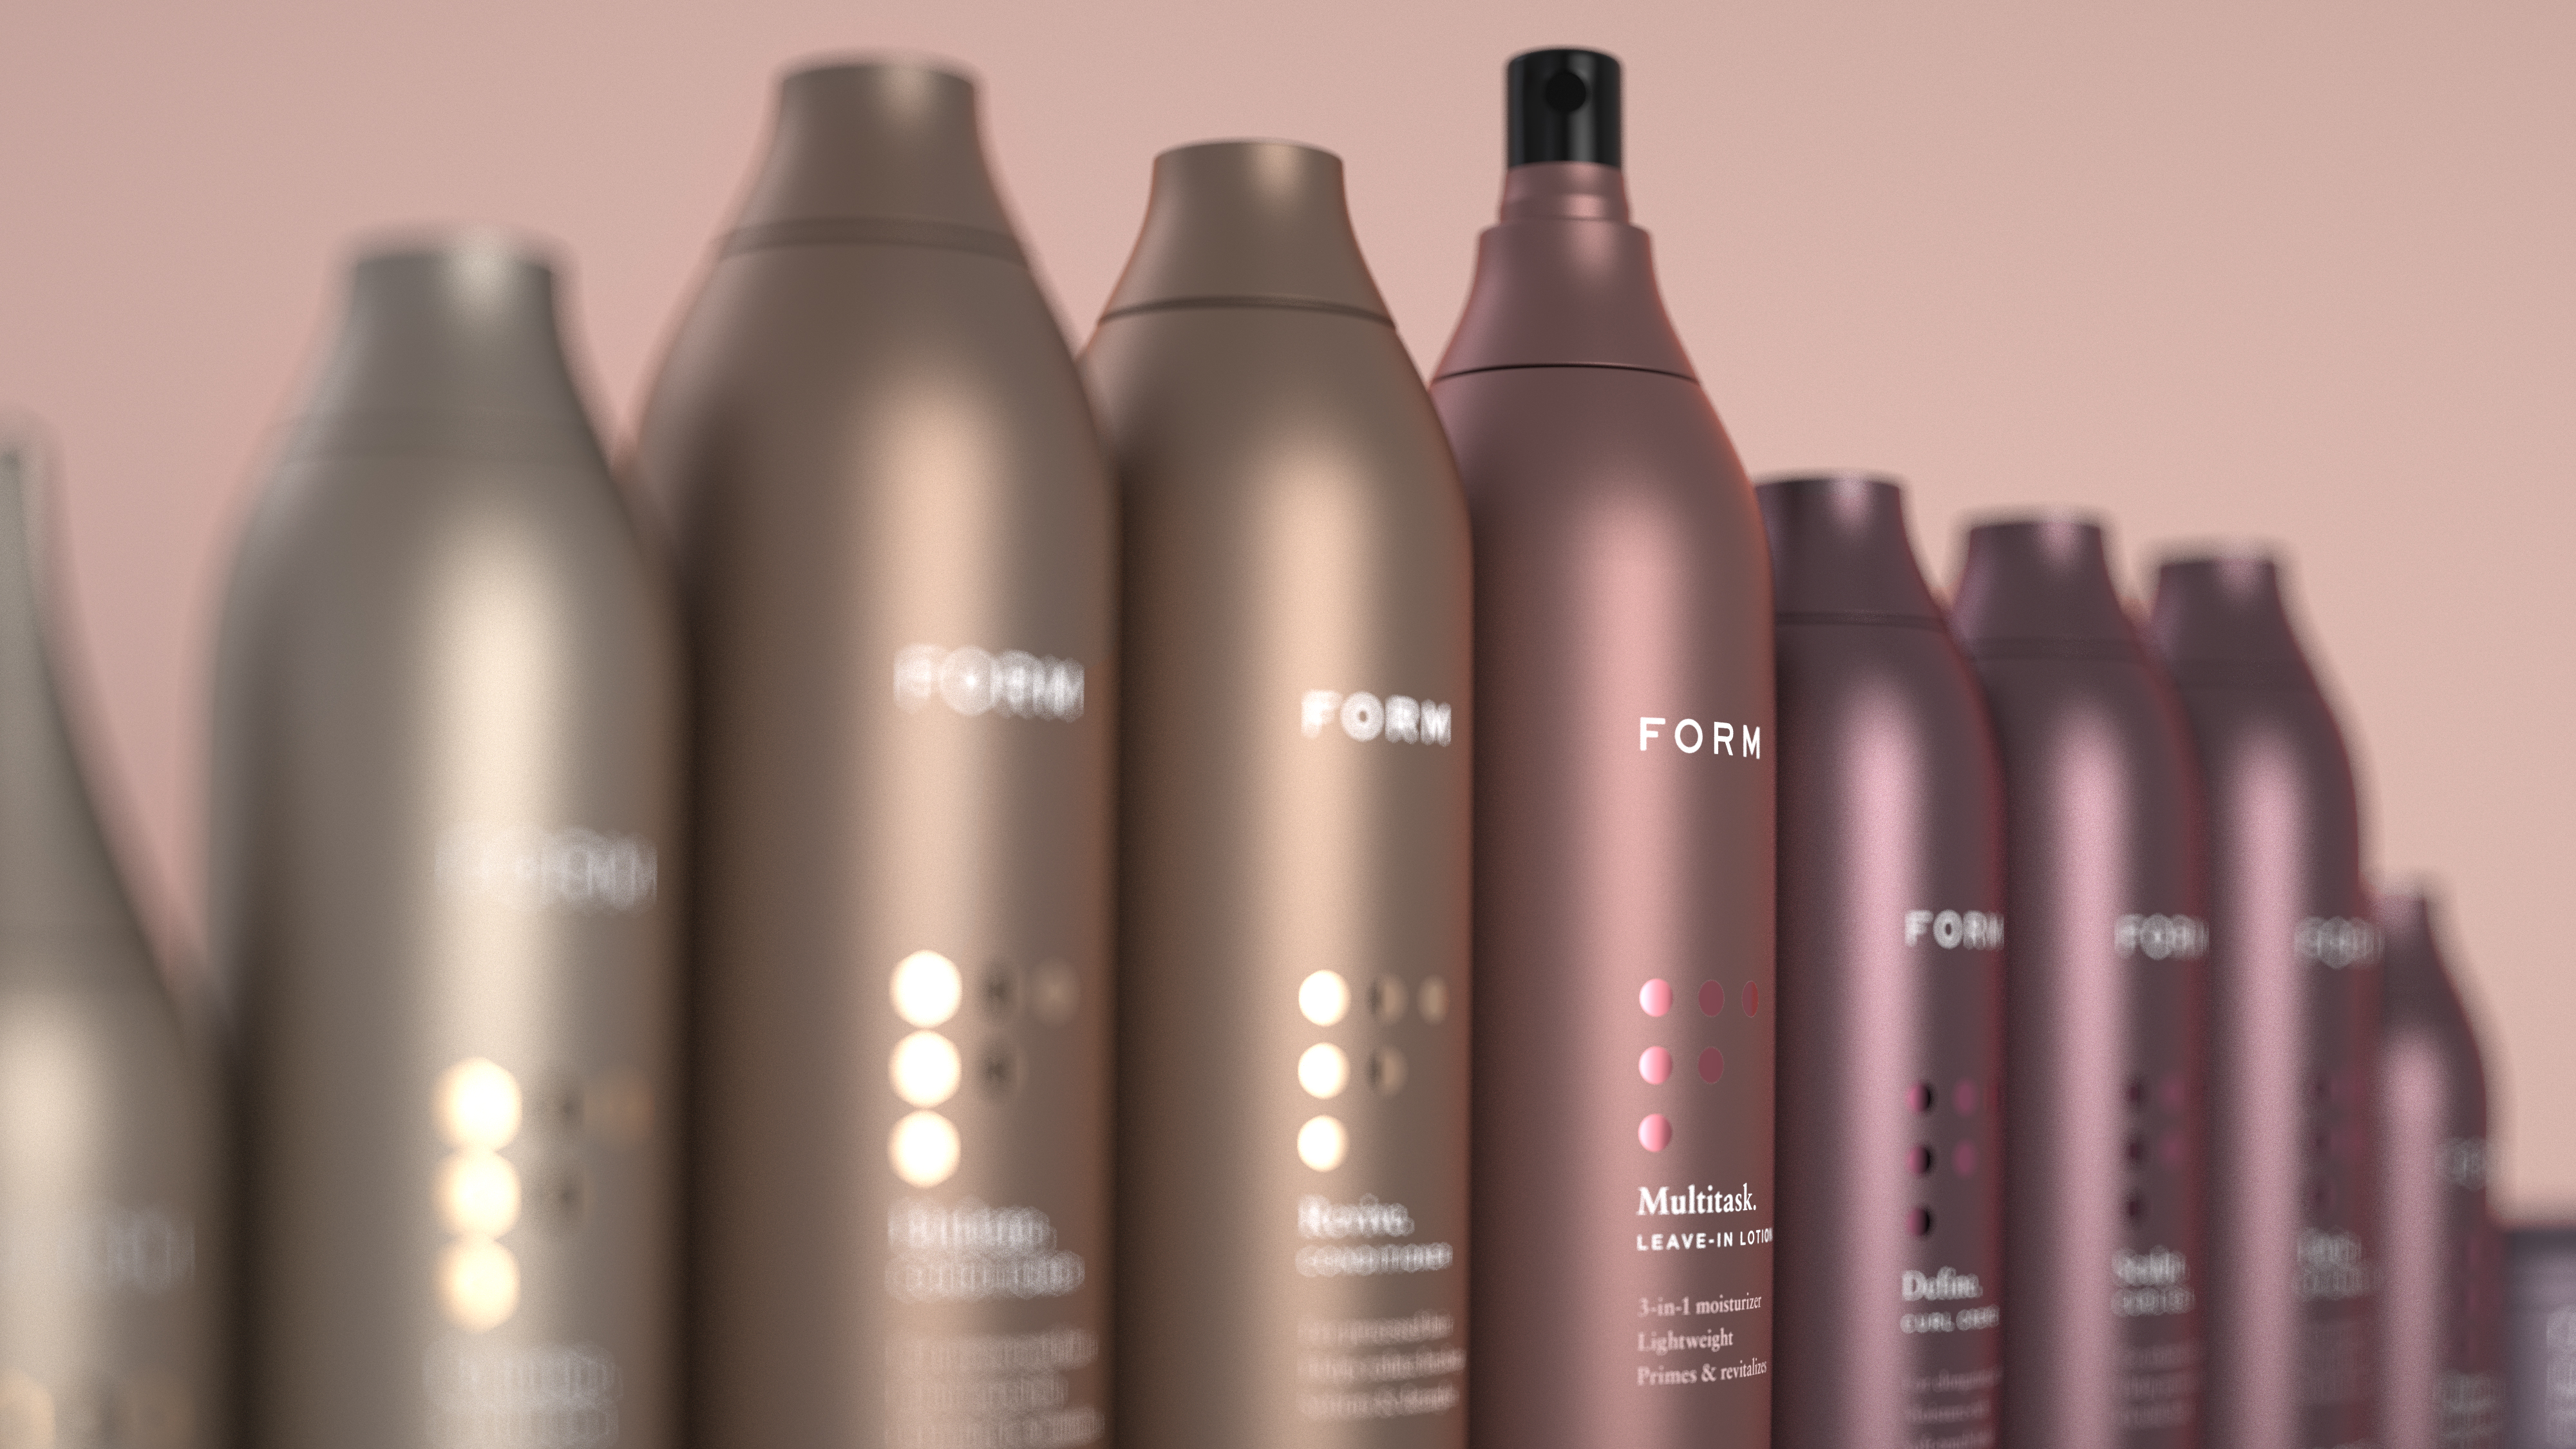 Tristan Walker launches FORM to make it easier for women of color to manage  their hair | TechCrunch